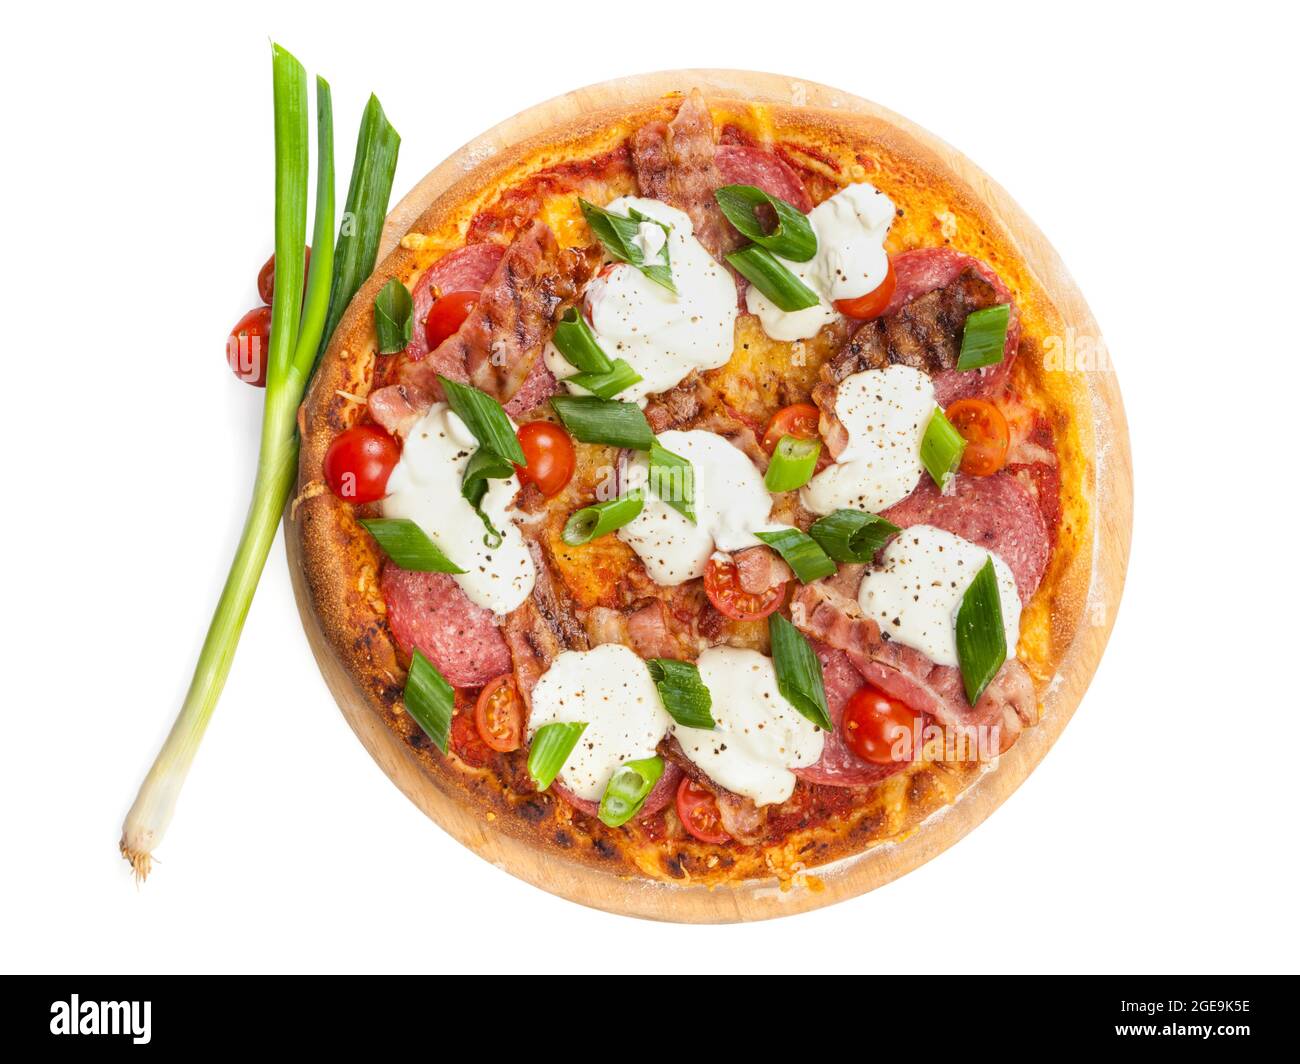 Pizza with salami, bacon, sour cream, tomatoes and spring onions on wooden platter  isolated on white background, high angle view Stock Photo